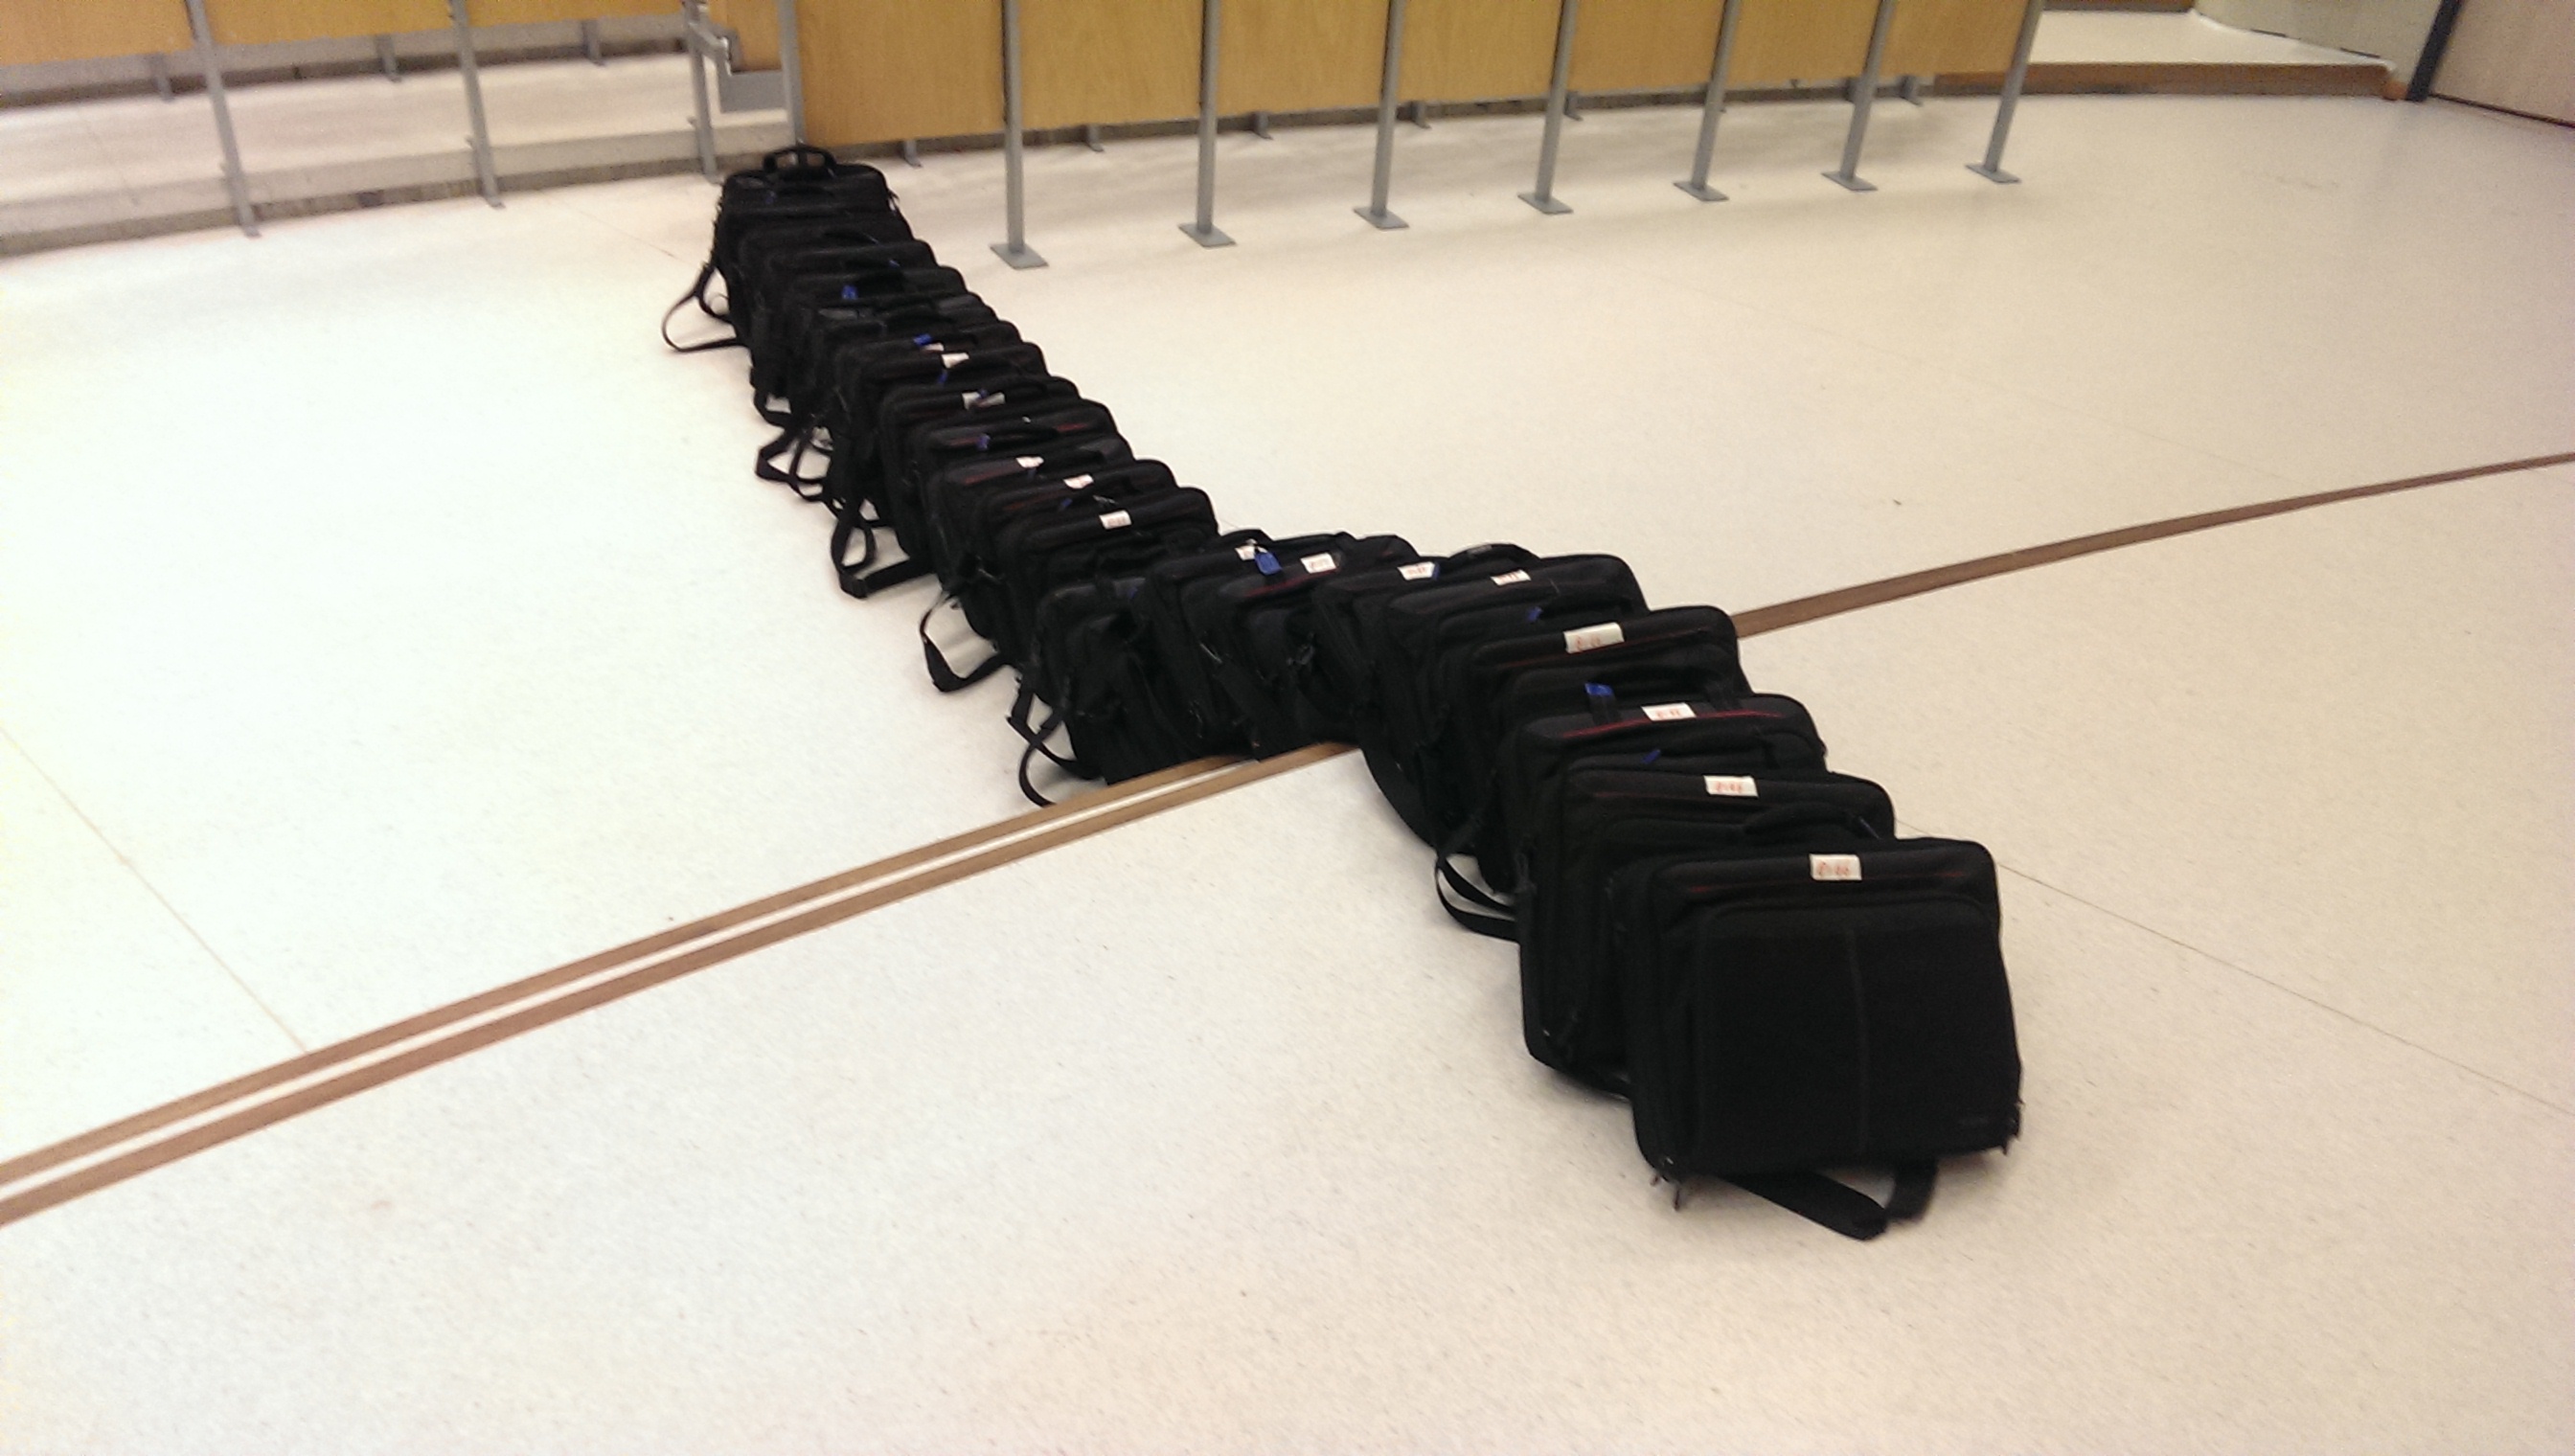 20 bagged laptops standing in a line